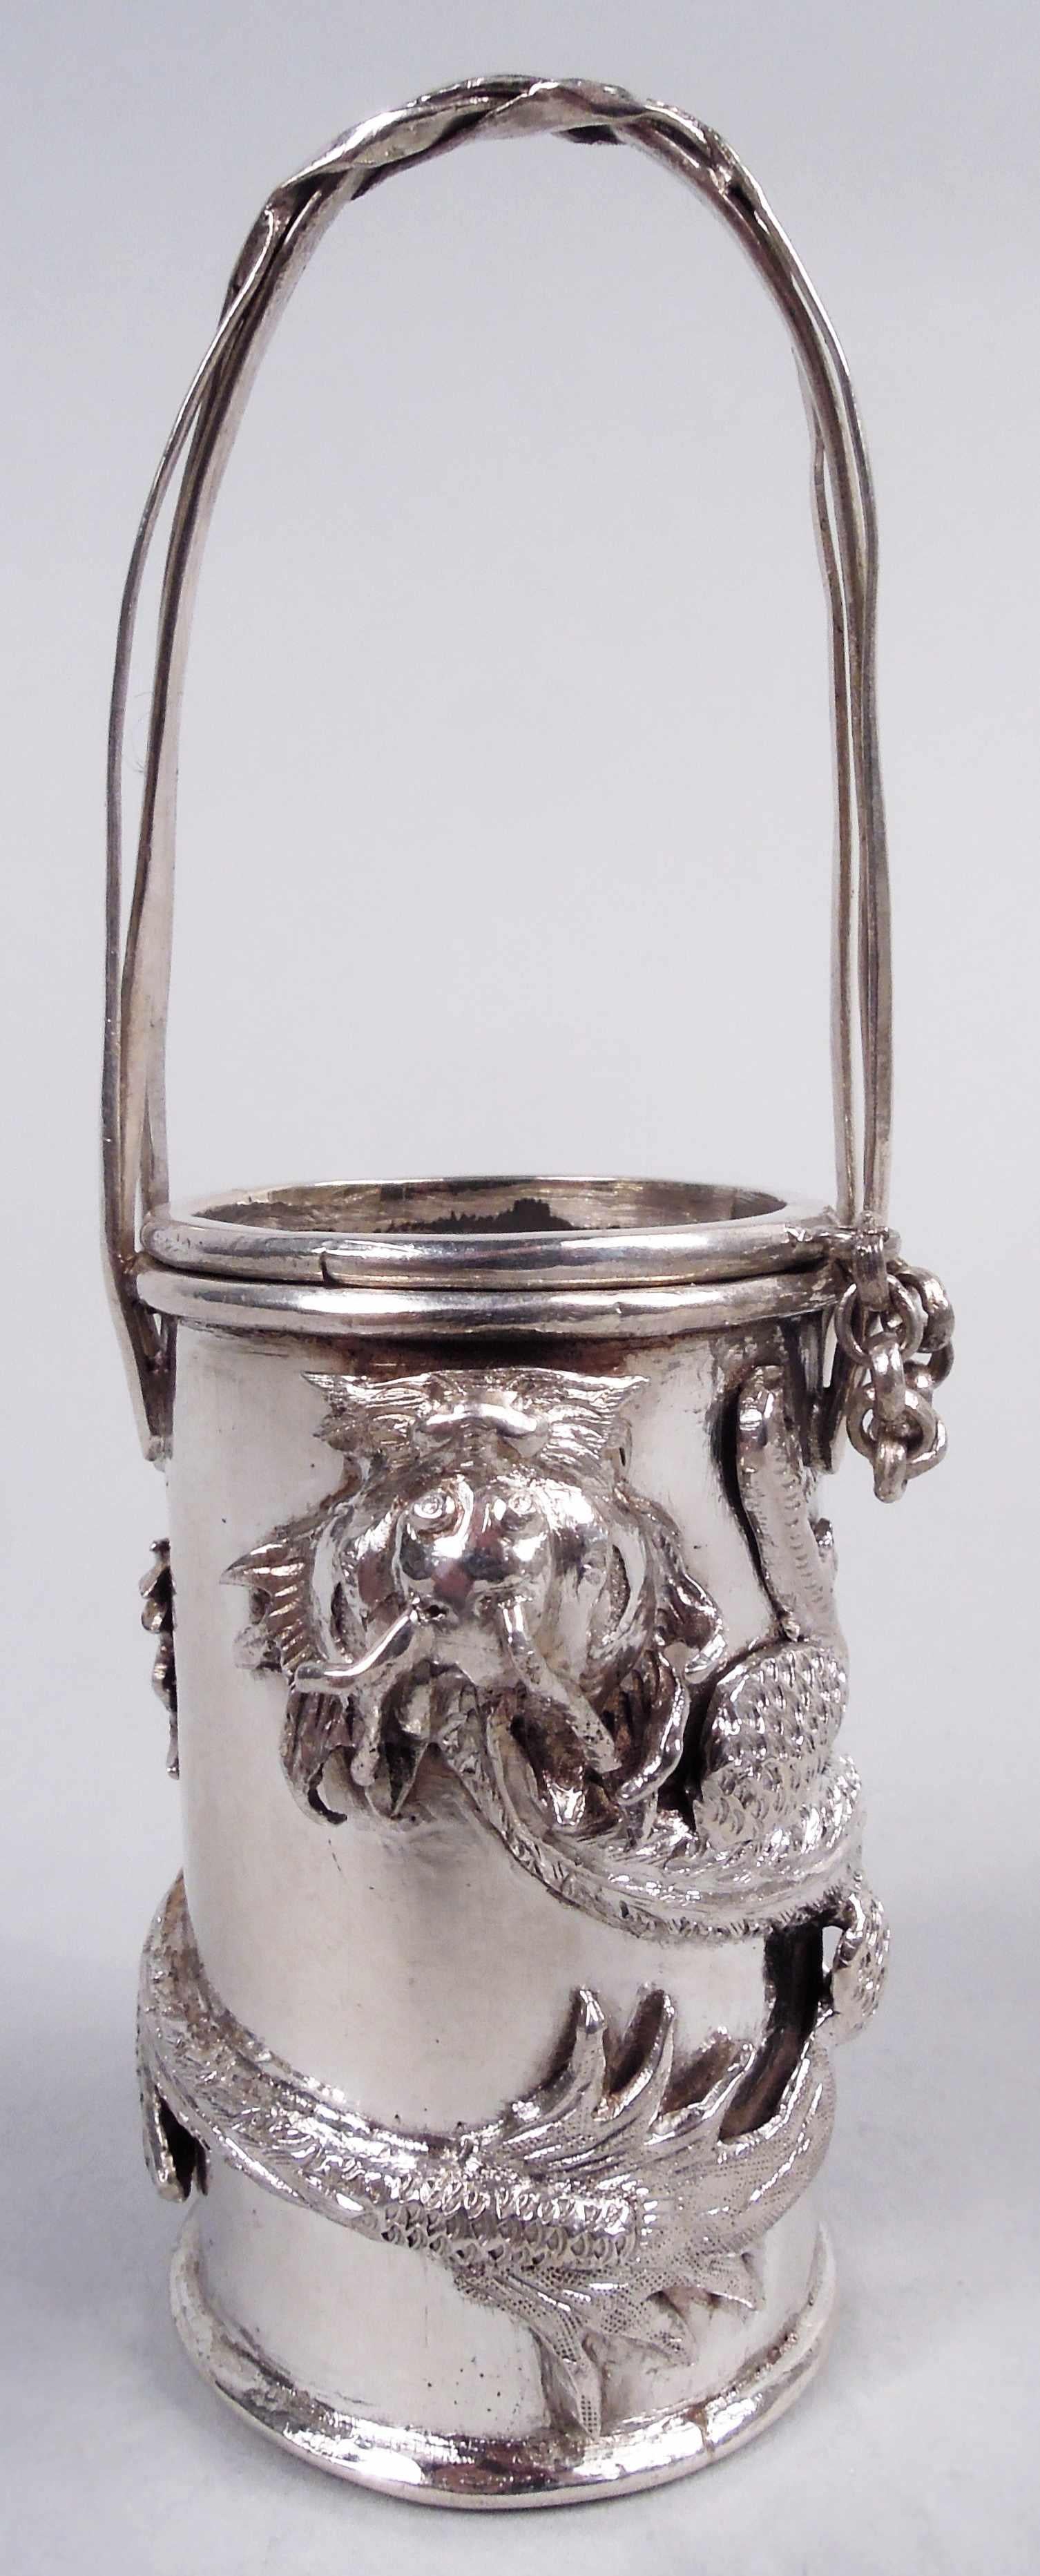 Pair of Chinese export silver mustard pots, ca 1890. Each: Cylindrical with fixed and entwined ratan-style handle; cover chained with inset and engraved diaper top. Applied wraparound horned and taloned dragon. For piquant condiments. Marks include